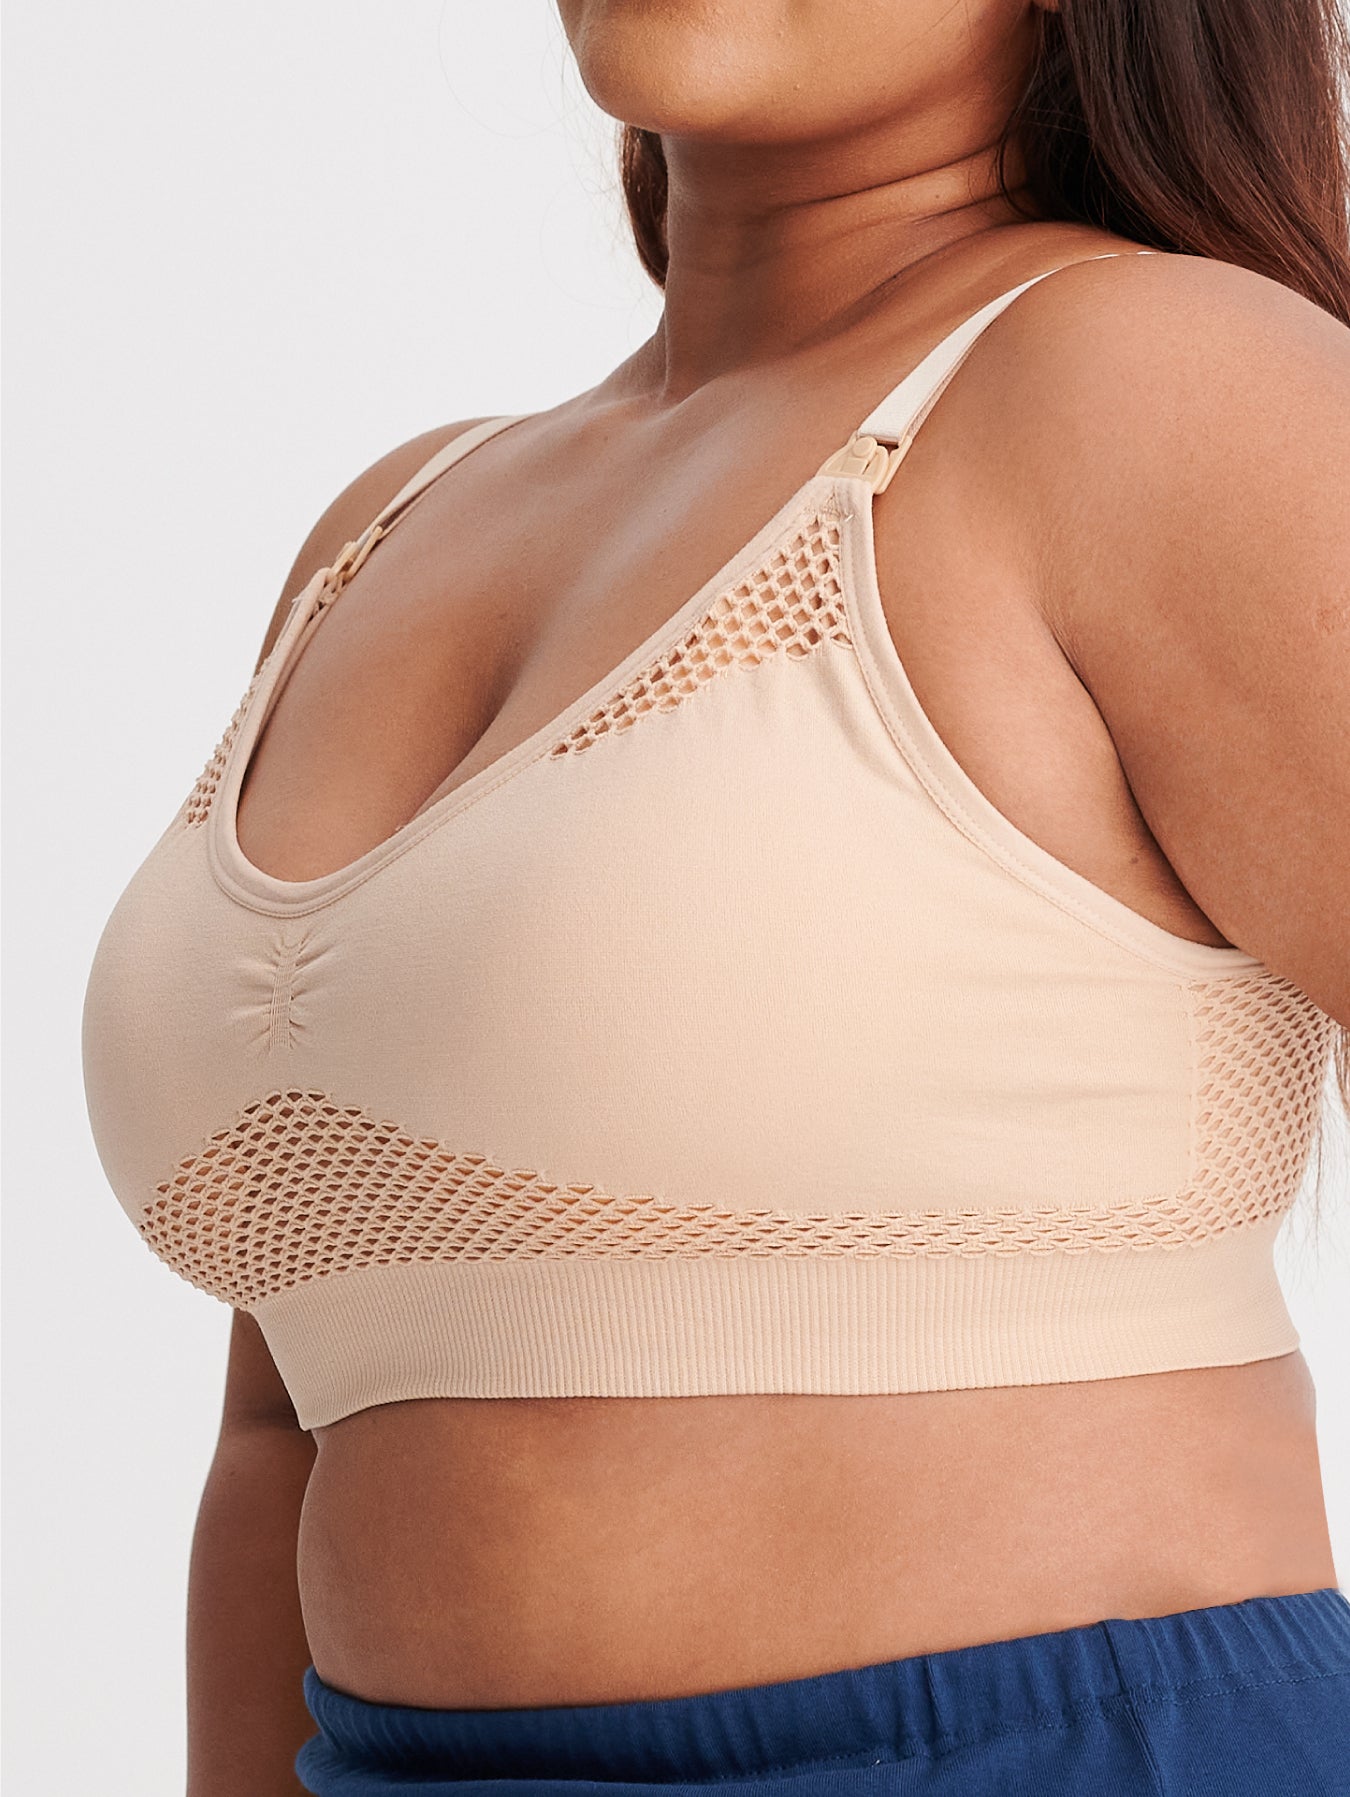 Beige Sports bra with built-in pumping system